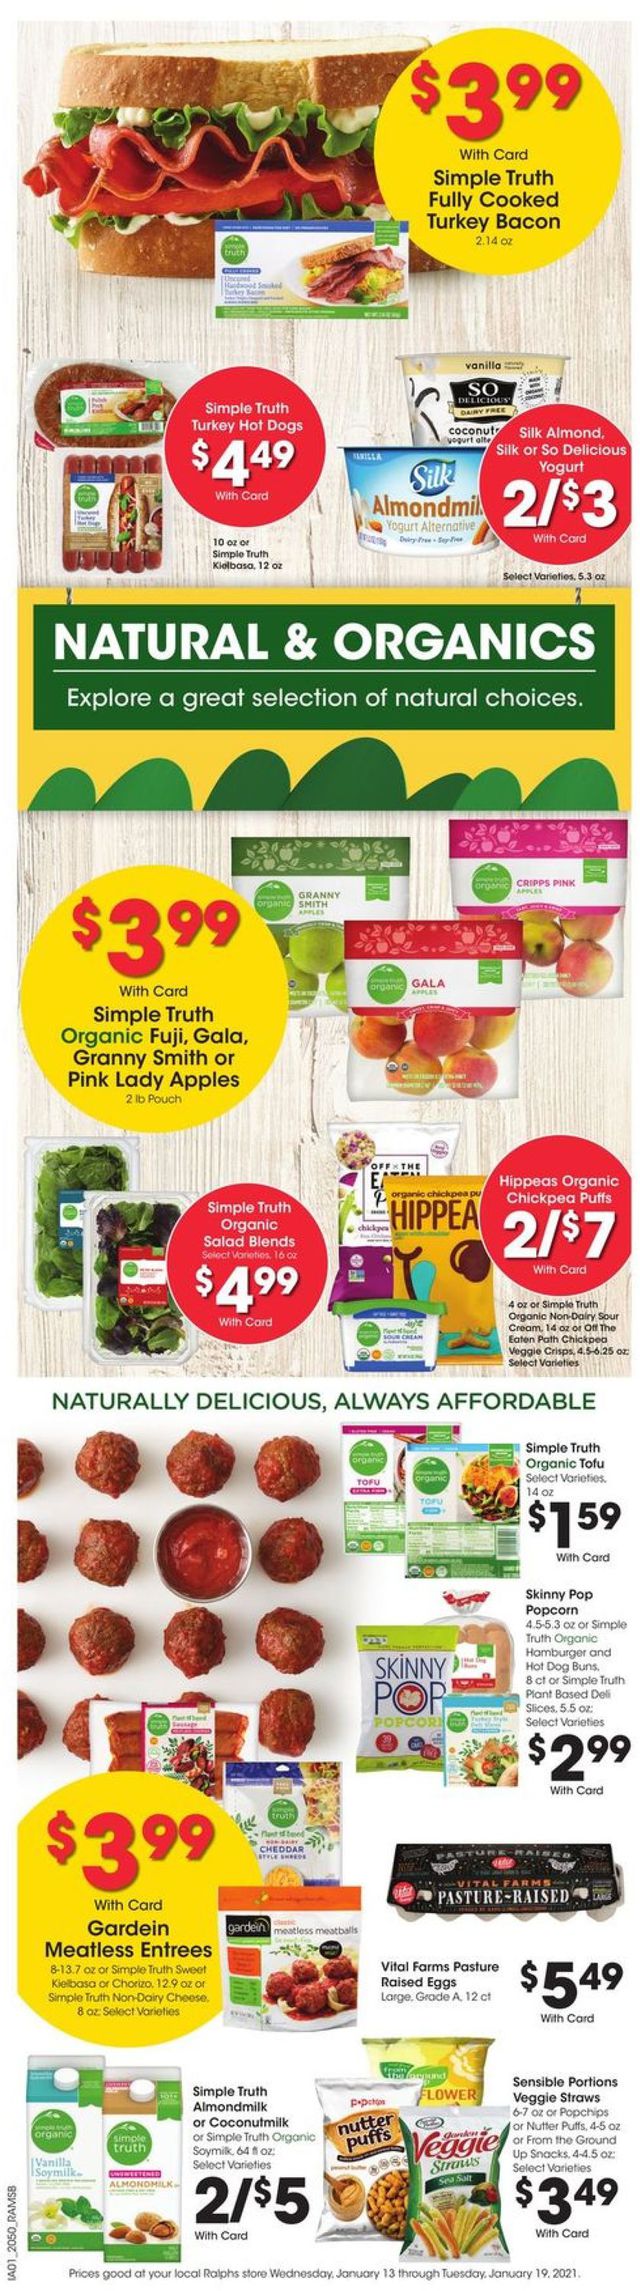 Ralphs Ad from 01/13/2021